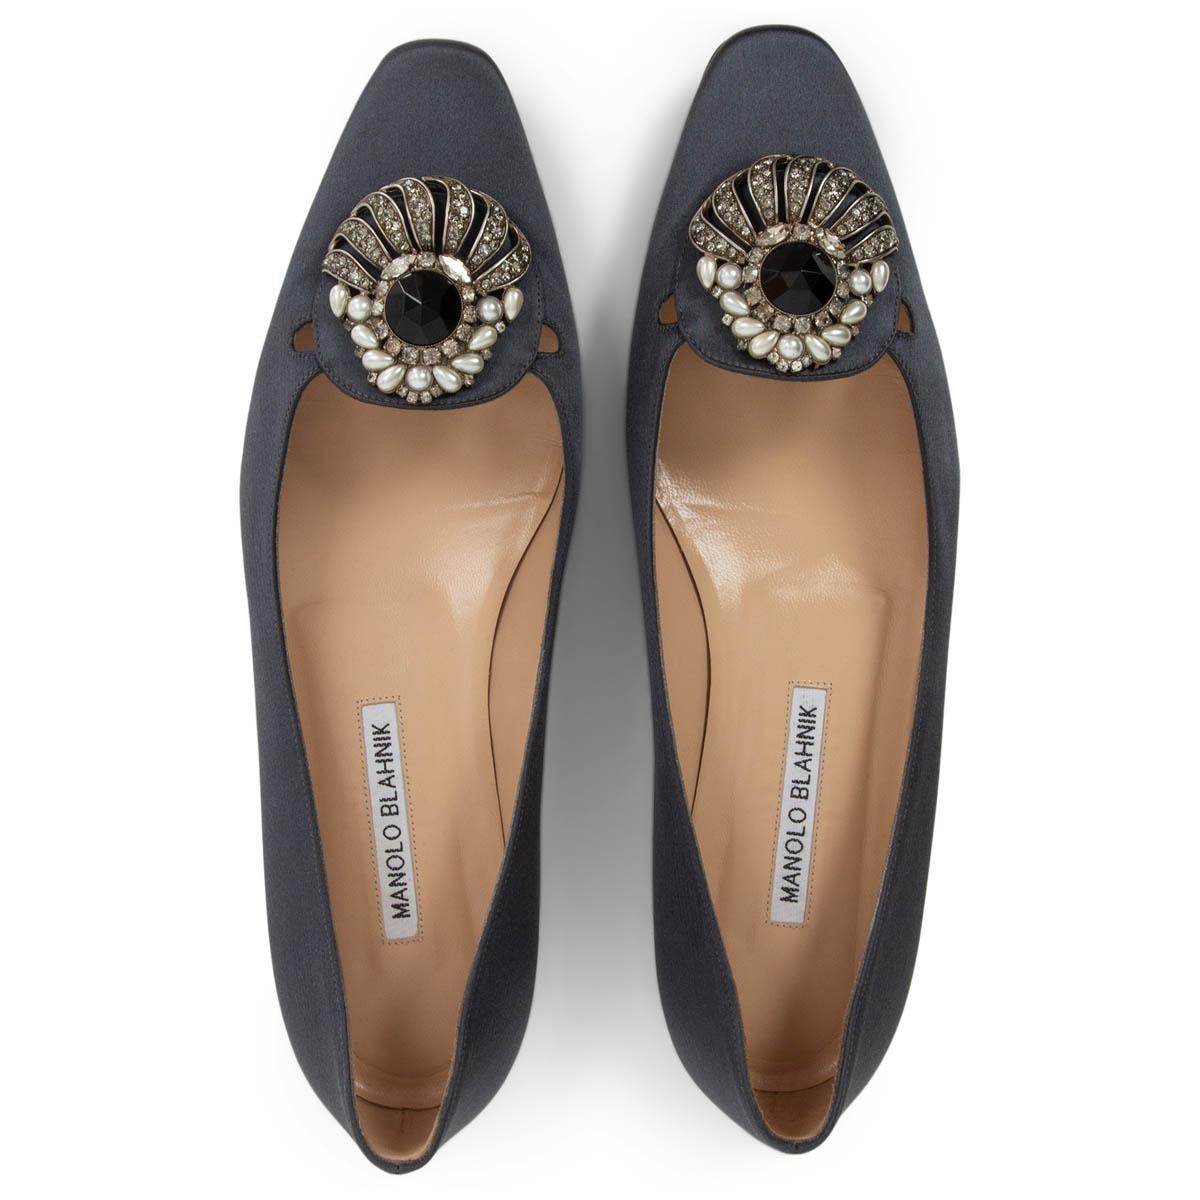 MANOLO BLAHNIK grey SATIN EMBELLISHED Ballet Flats Shoes 39 In Excellent Condition For Sale In Zürich, CH